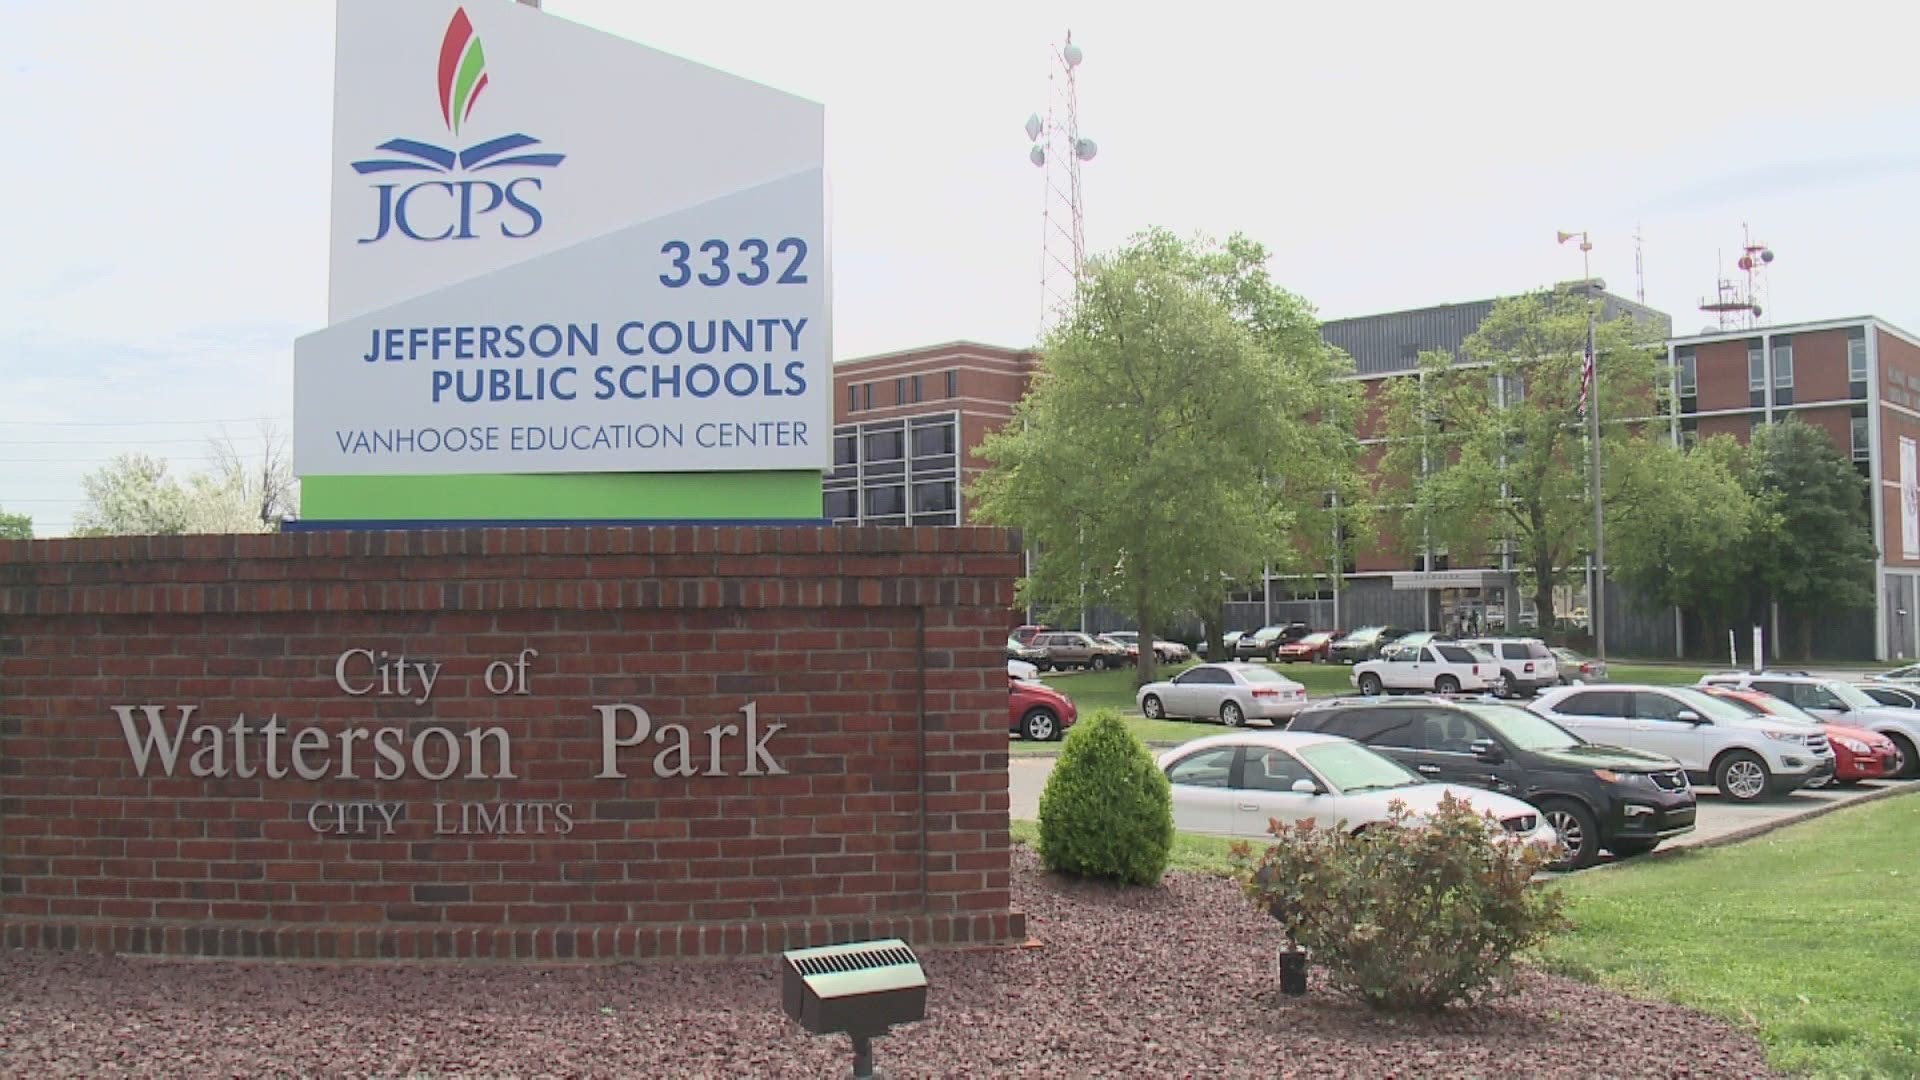 Following an abrupt end to a Jefferson County Public Schools (JCPS) Board meeting, the district held another meeting Thursday afternoon.